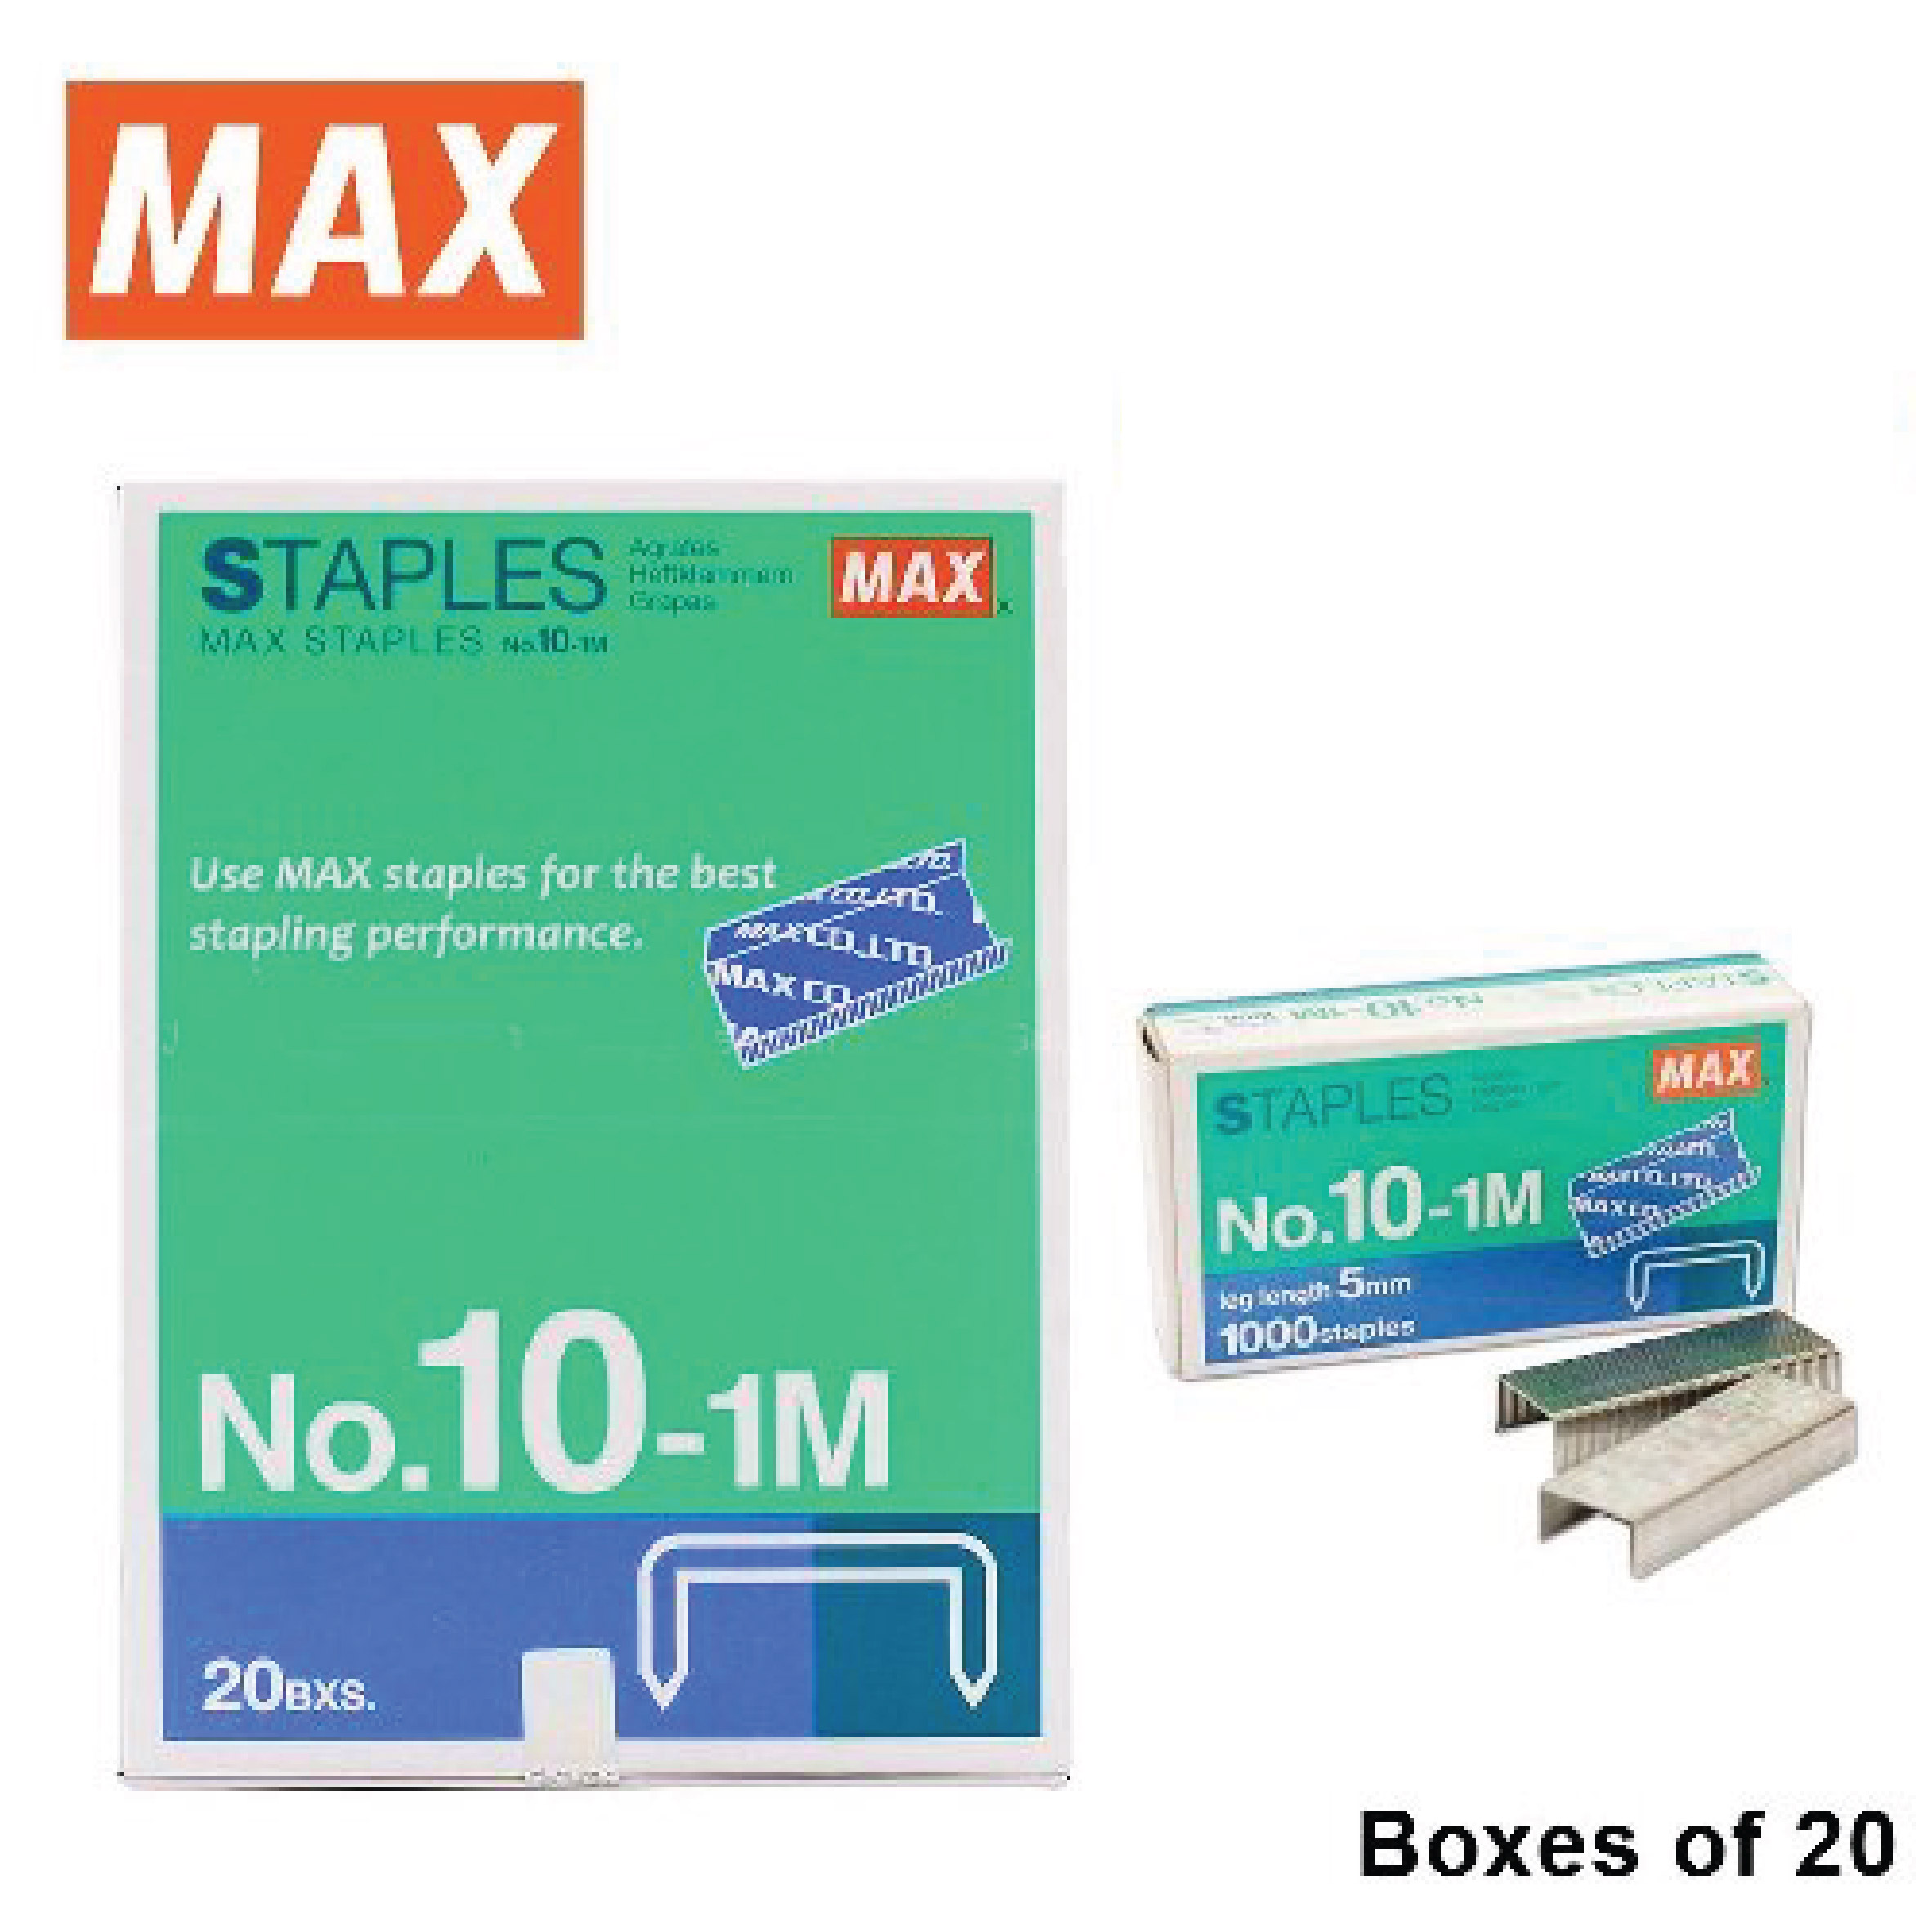 MAX Staples No.10-1M Bullet - 20 boxes/pack